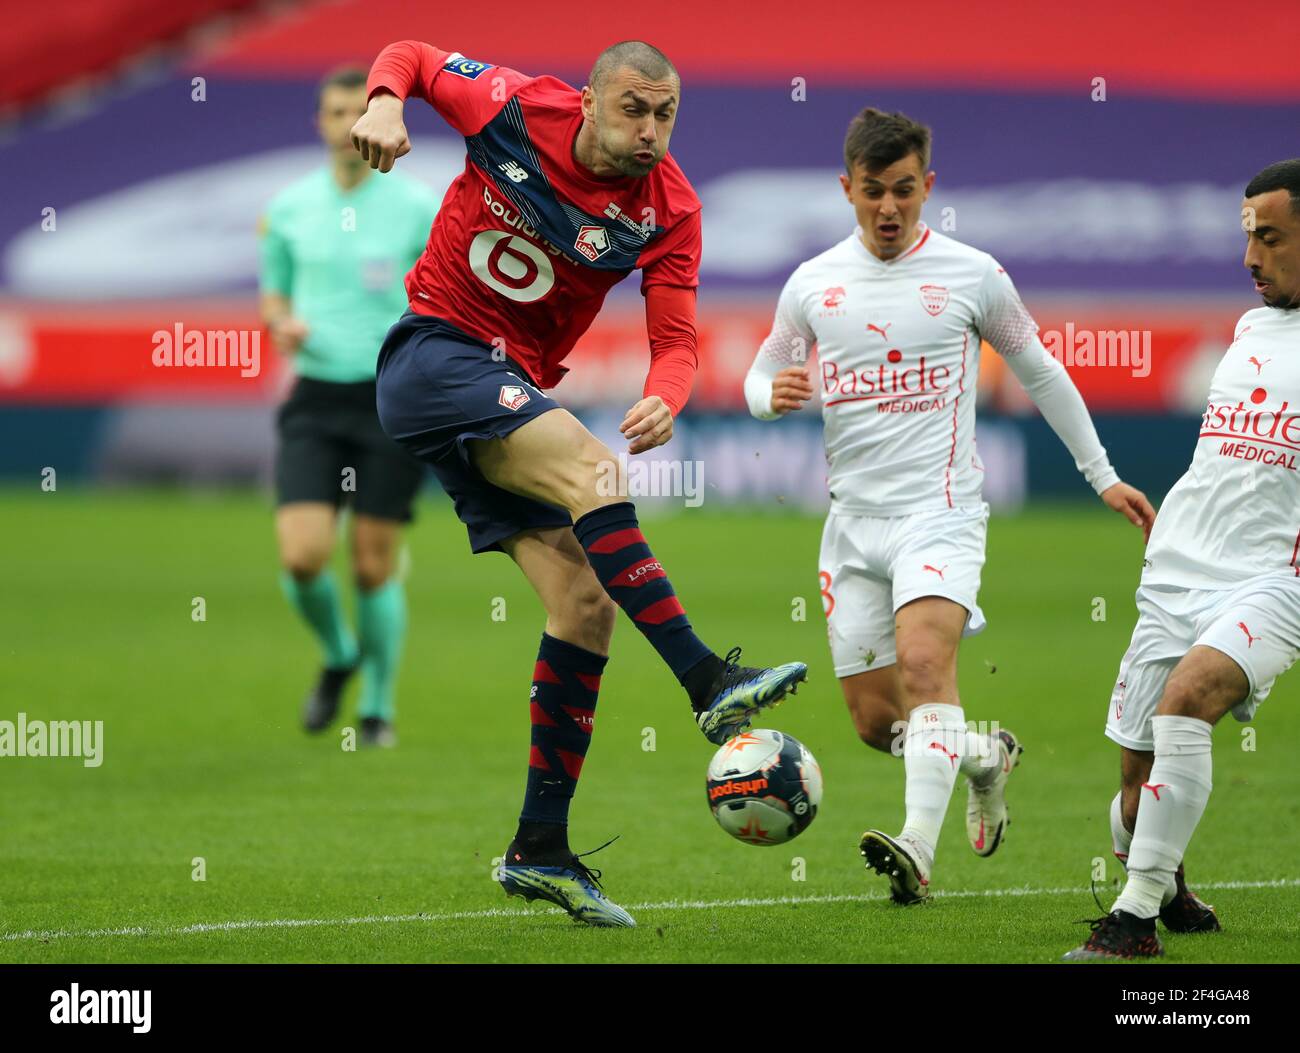 Soccer Football - Ligue 1 - Lille v Nimes Olympique - Stade Pierre-Mauroy,  Lille, France - March 21, 2021 Lille's Burak Yilmaz in action with Nimes  Olympique's Andres Cubas REUTERS/Pascal Rossignol Stock Photo - Alamy